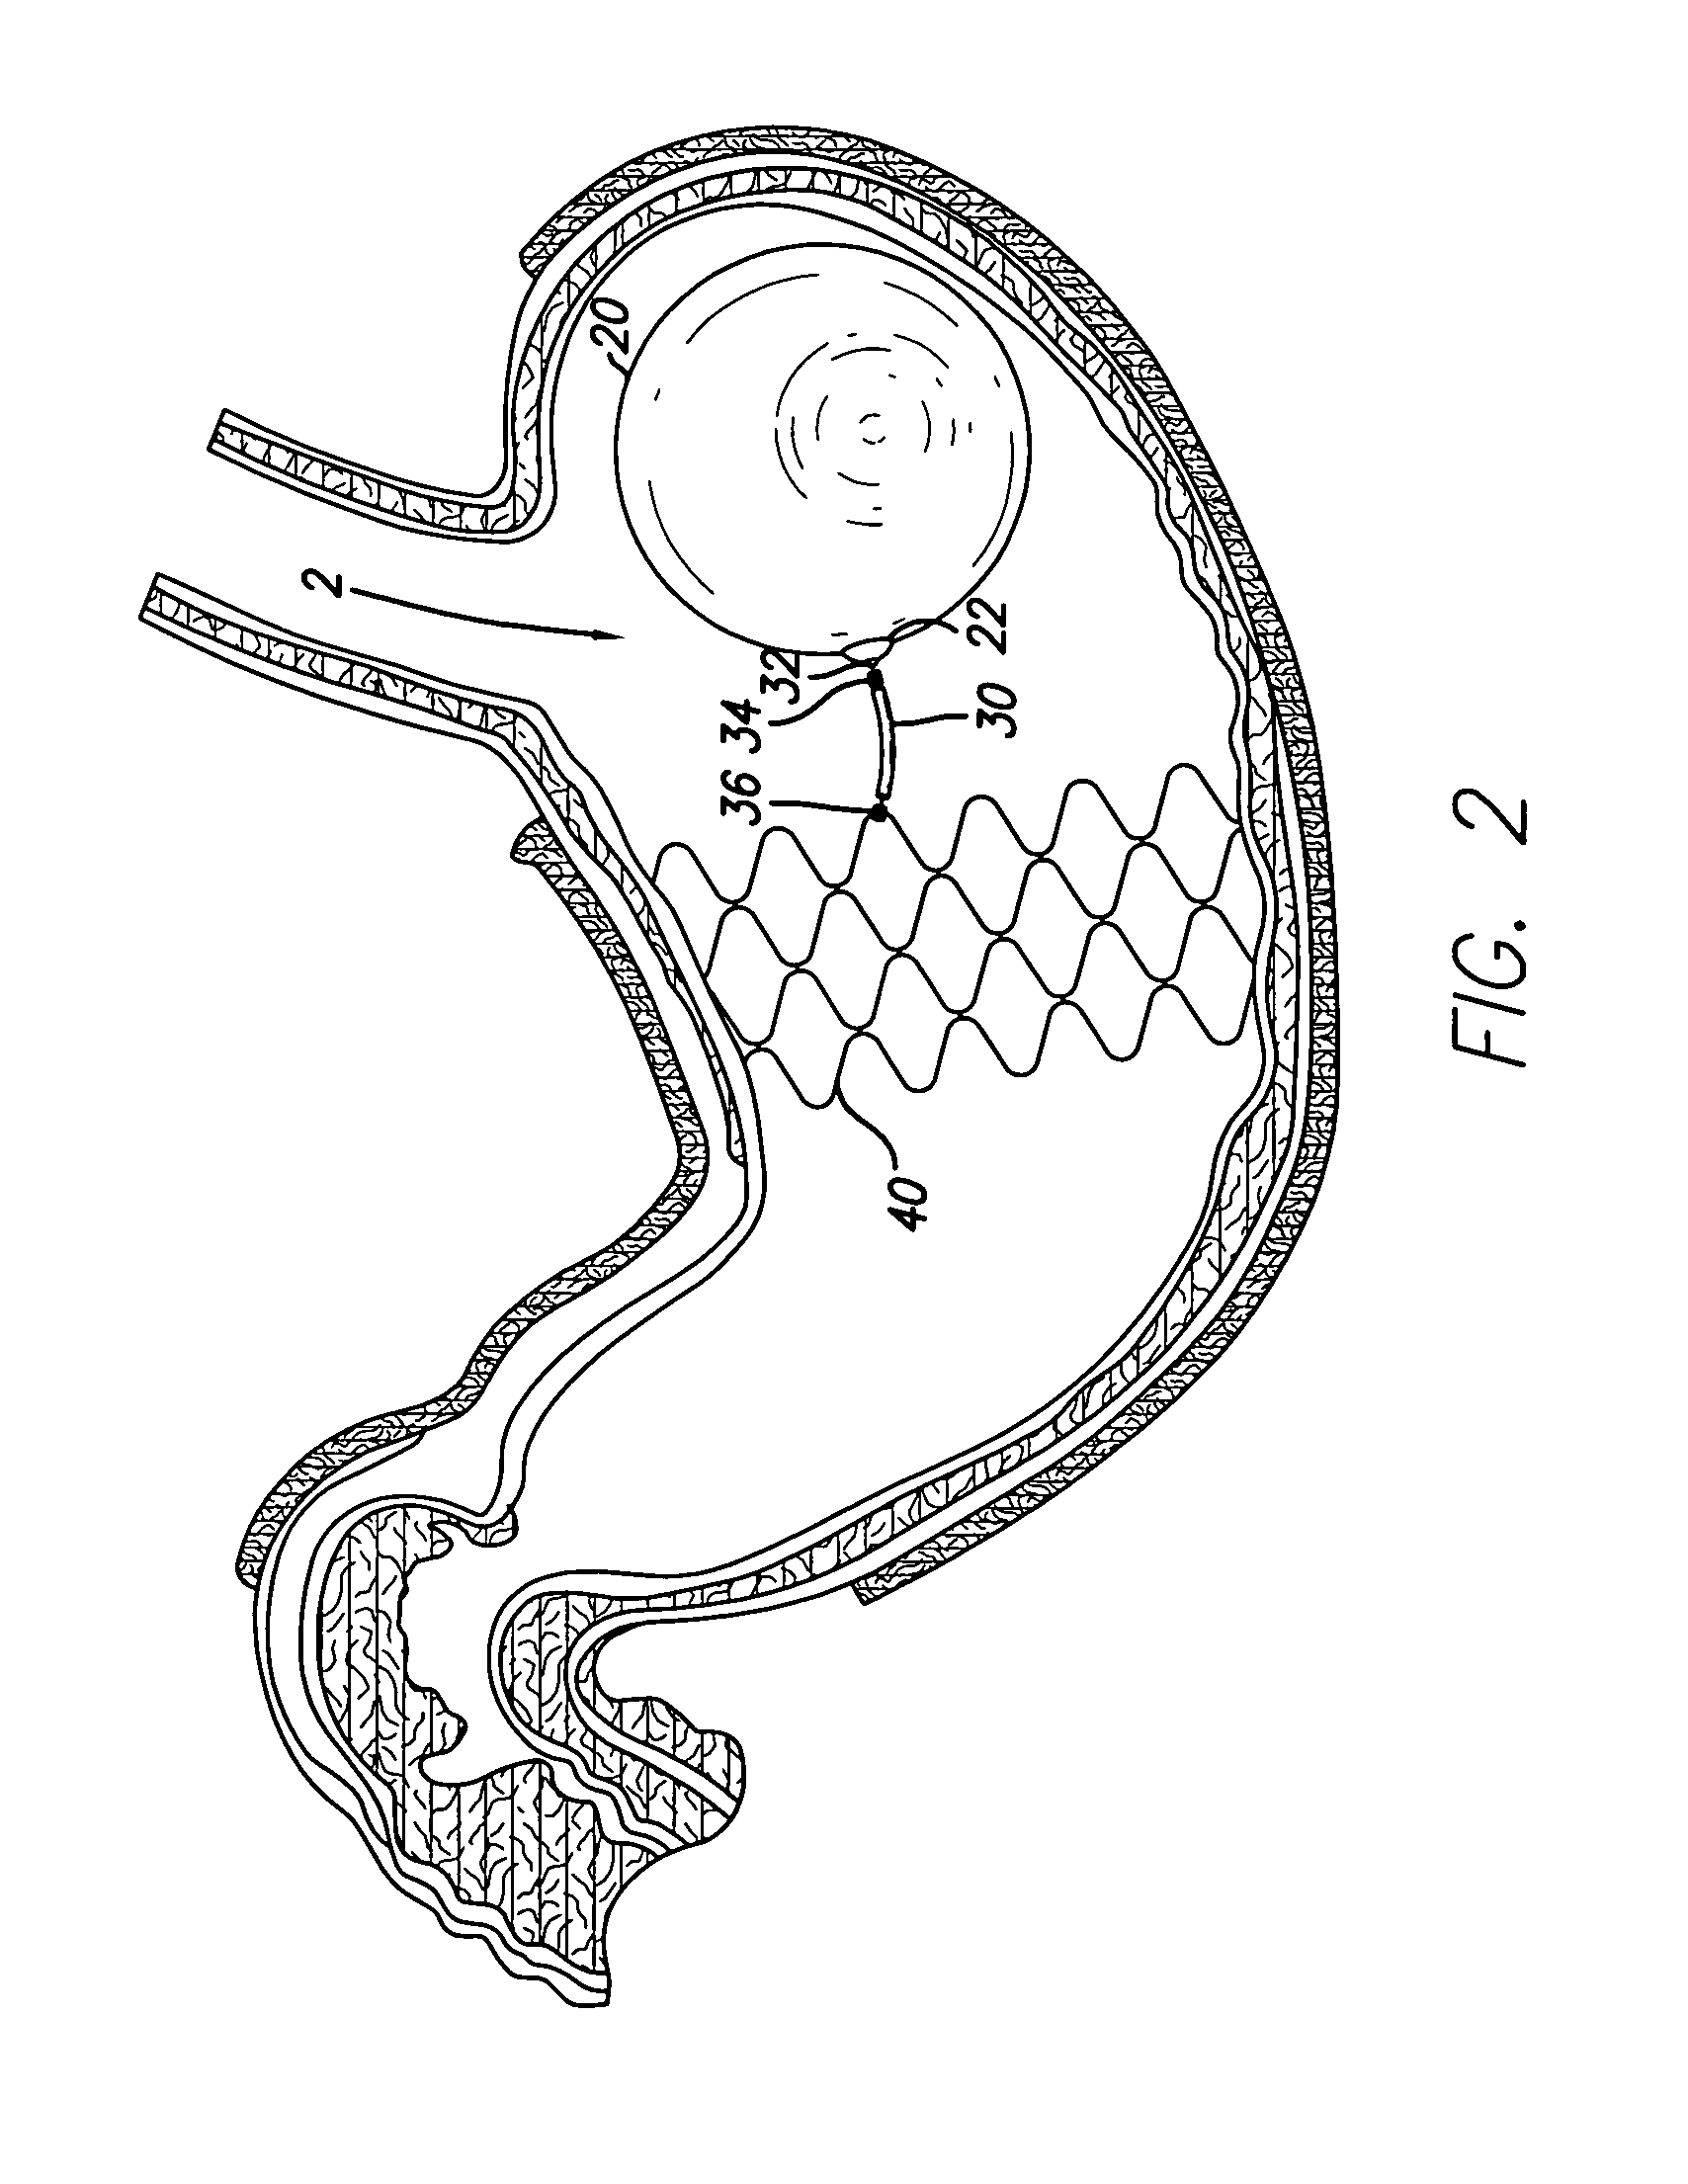 Stented anchoring of gastric space-occupying devices